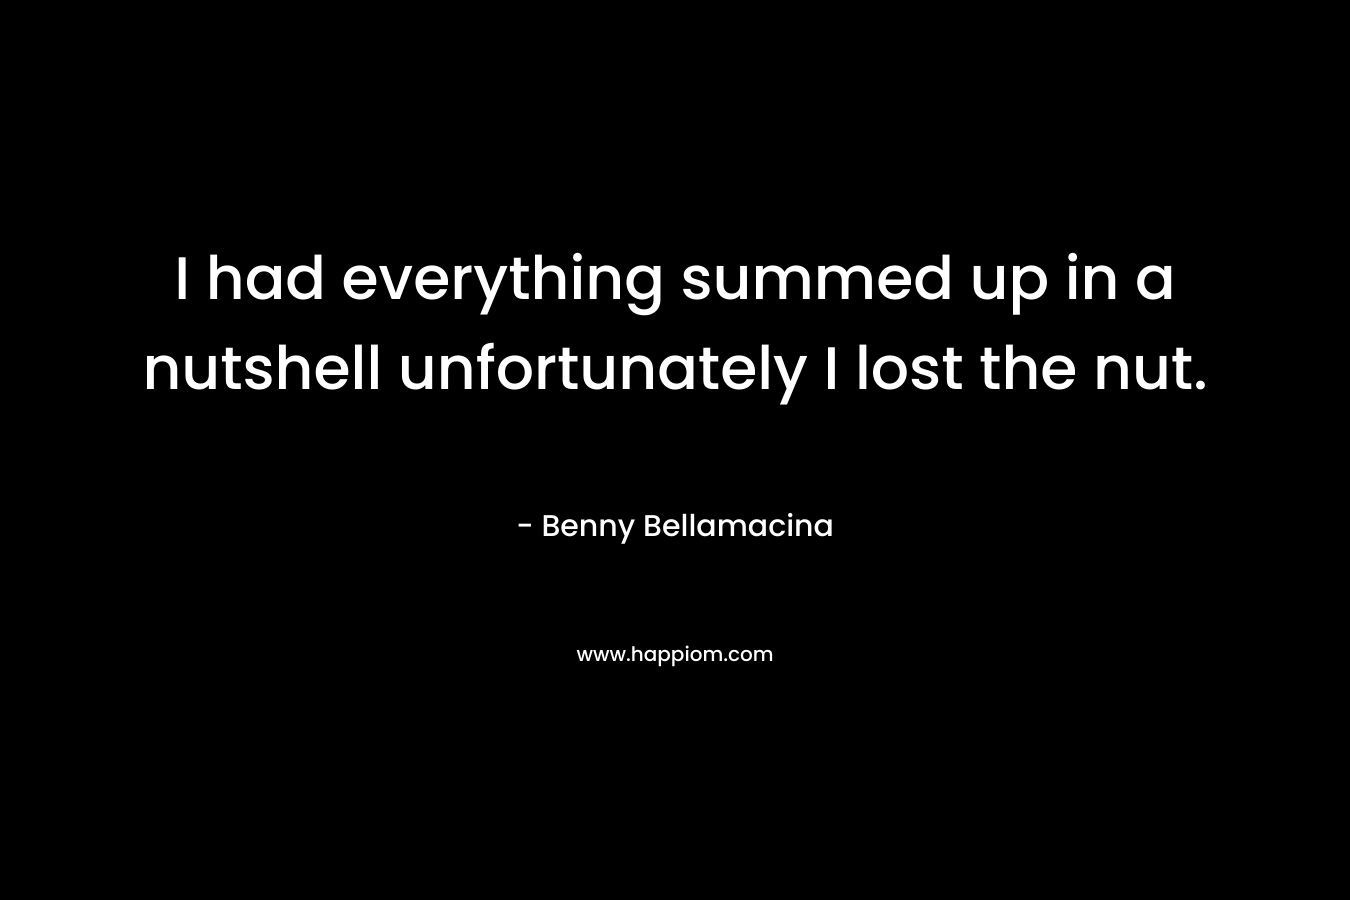 I had everything summed up in a nutshell unfortunately I lost the nut. – Benny Bellamacina